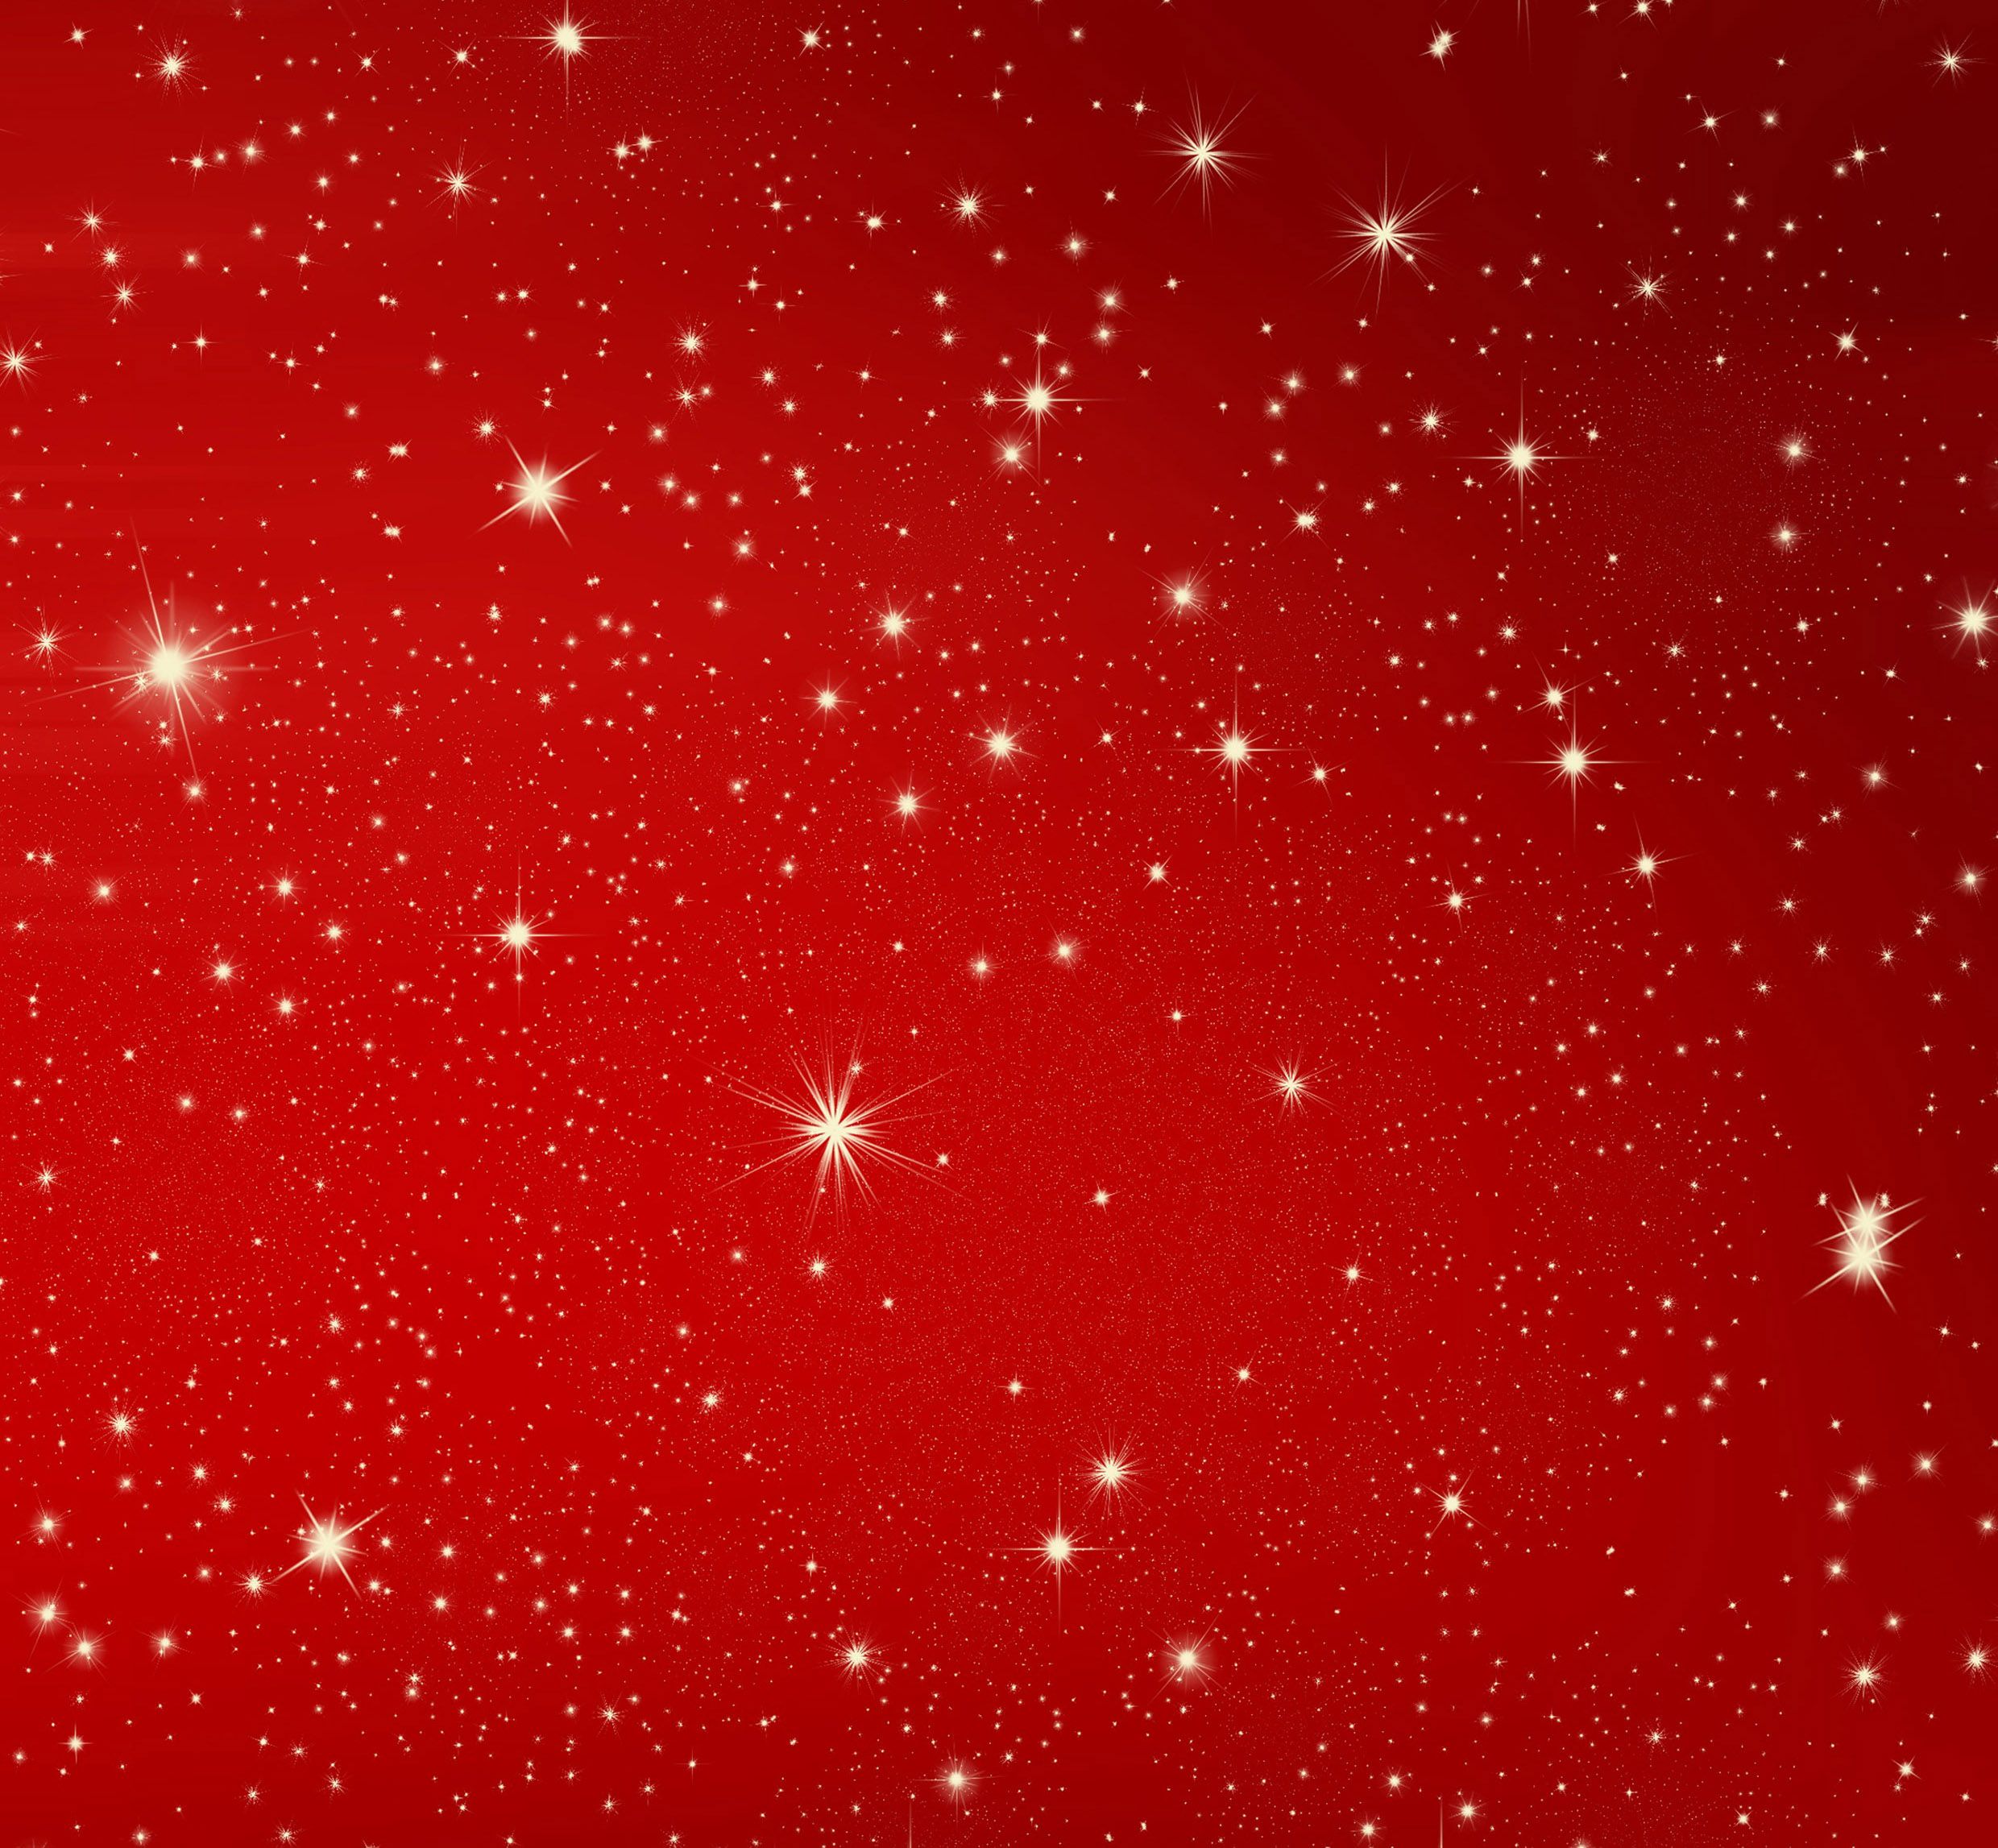 Red Stars Wallpapers - Wallpaper Cave